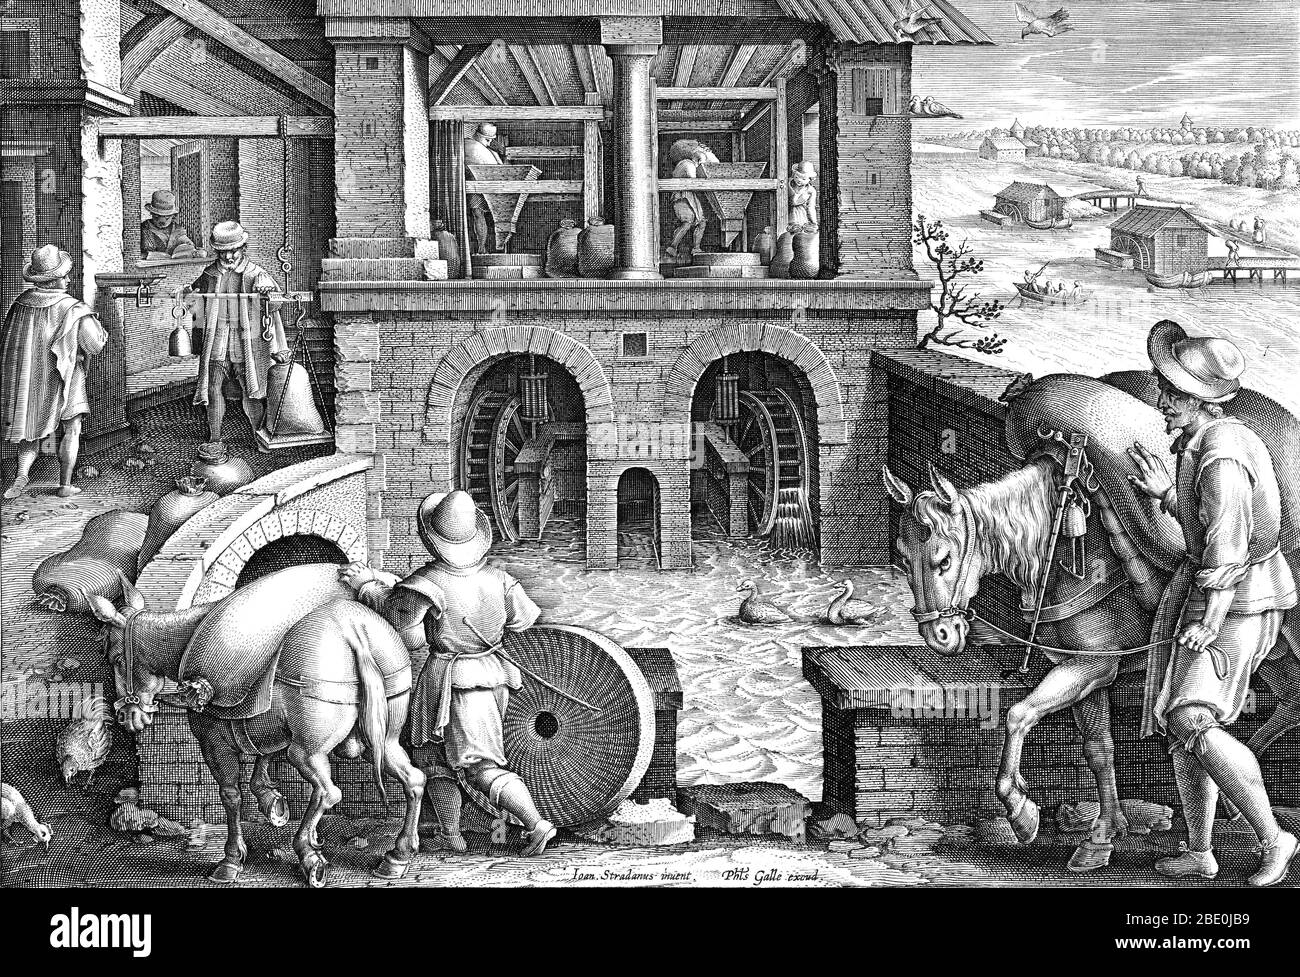 Illustration of workers bringing grain to a watermill for grinding, c. 1580-1605. On the upper level of the watermill are workers emptying out the contents of the sacks into large metal funnels. On the right are more watermills in the distance. The watermill was invented around the 3rd century BC. The Invention of the Watermill, tenth plate from a print series entitled Nova Reperta (New Inventions of Modern Times) consisting of a title page and 19 plates, engraved by Jan Collaert I, after Jan van der Straet, called Stradanus, and published by Philips Galle. Stock Photo